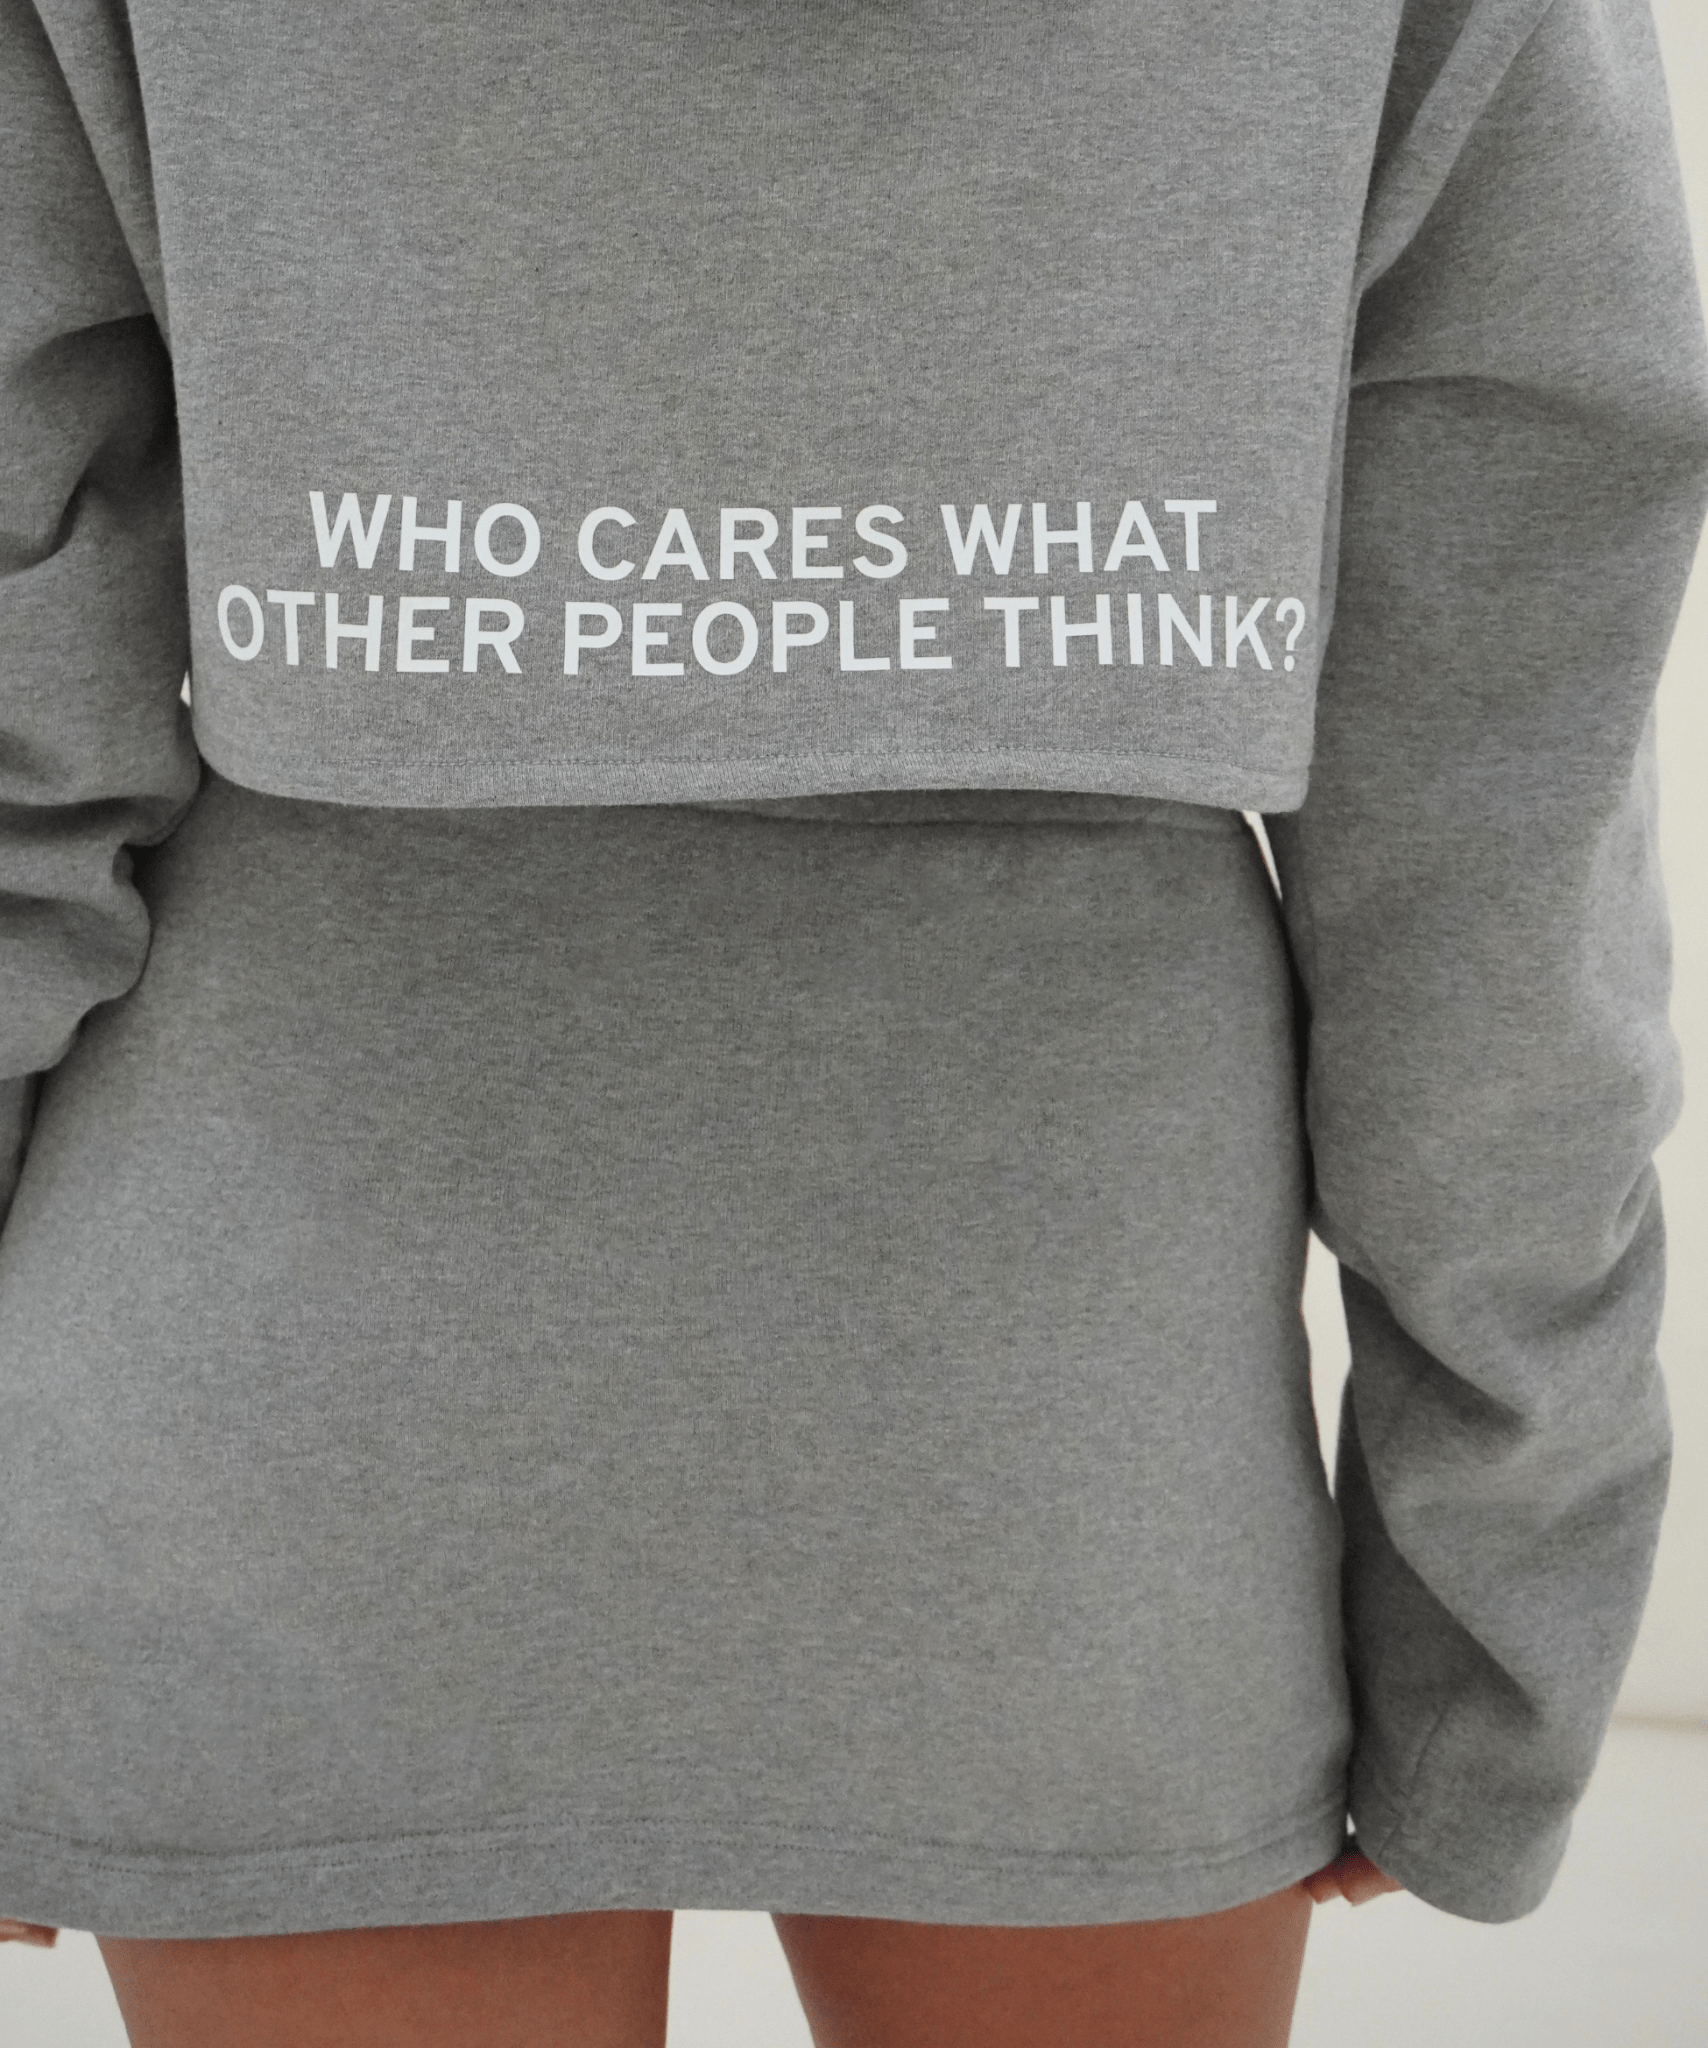 Hoodie Set ‘WHO CARES WHAT OTHER PEOPLE THINK?’ - OBLIVIOUS?